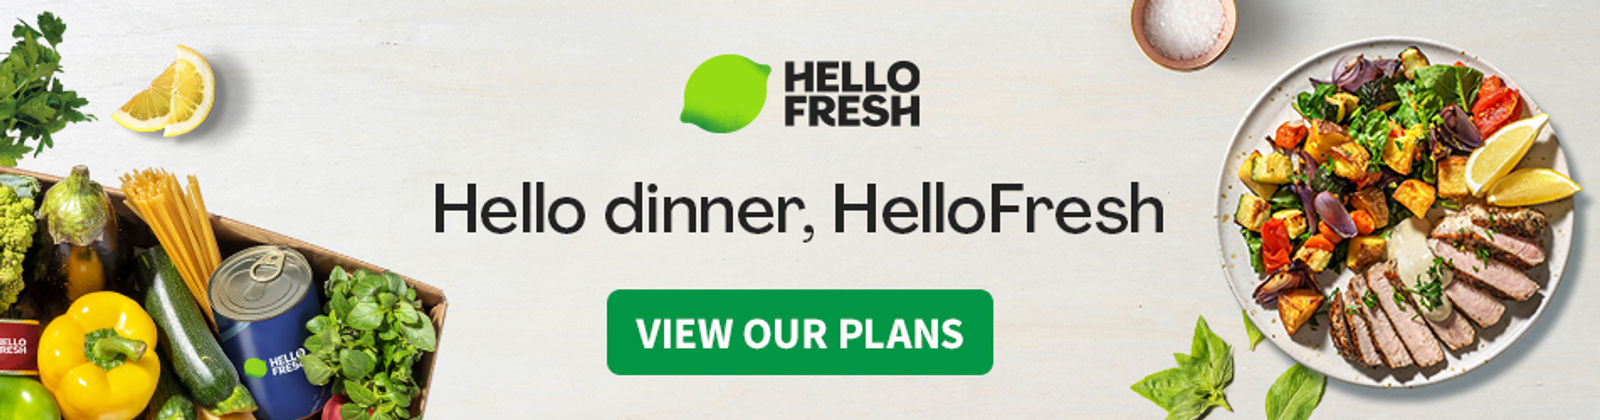 Hello dinner, HelloFresh, View our Plans